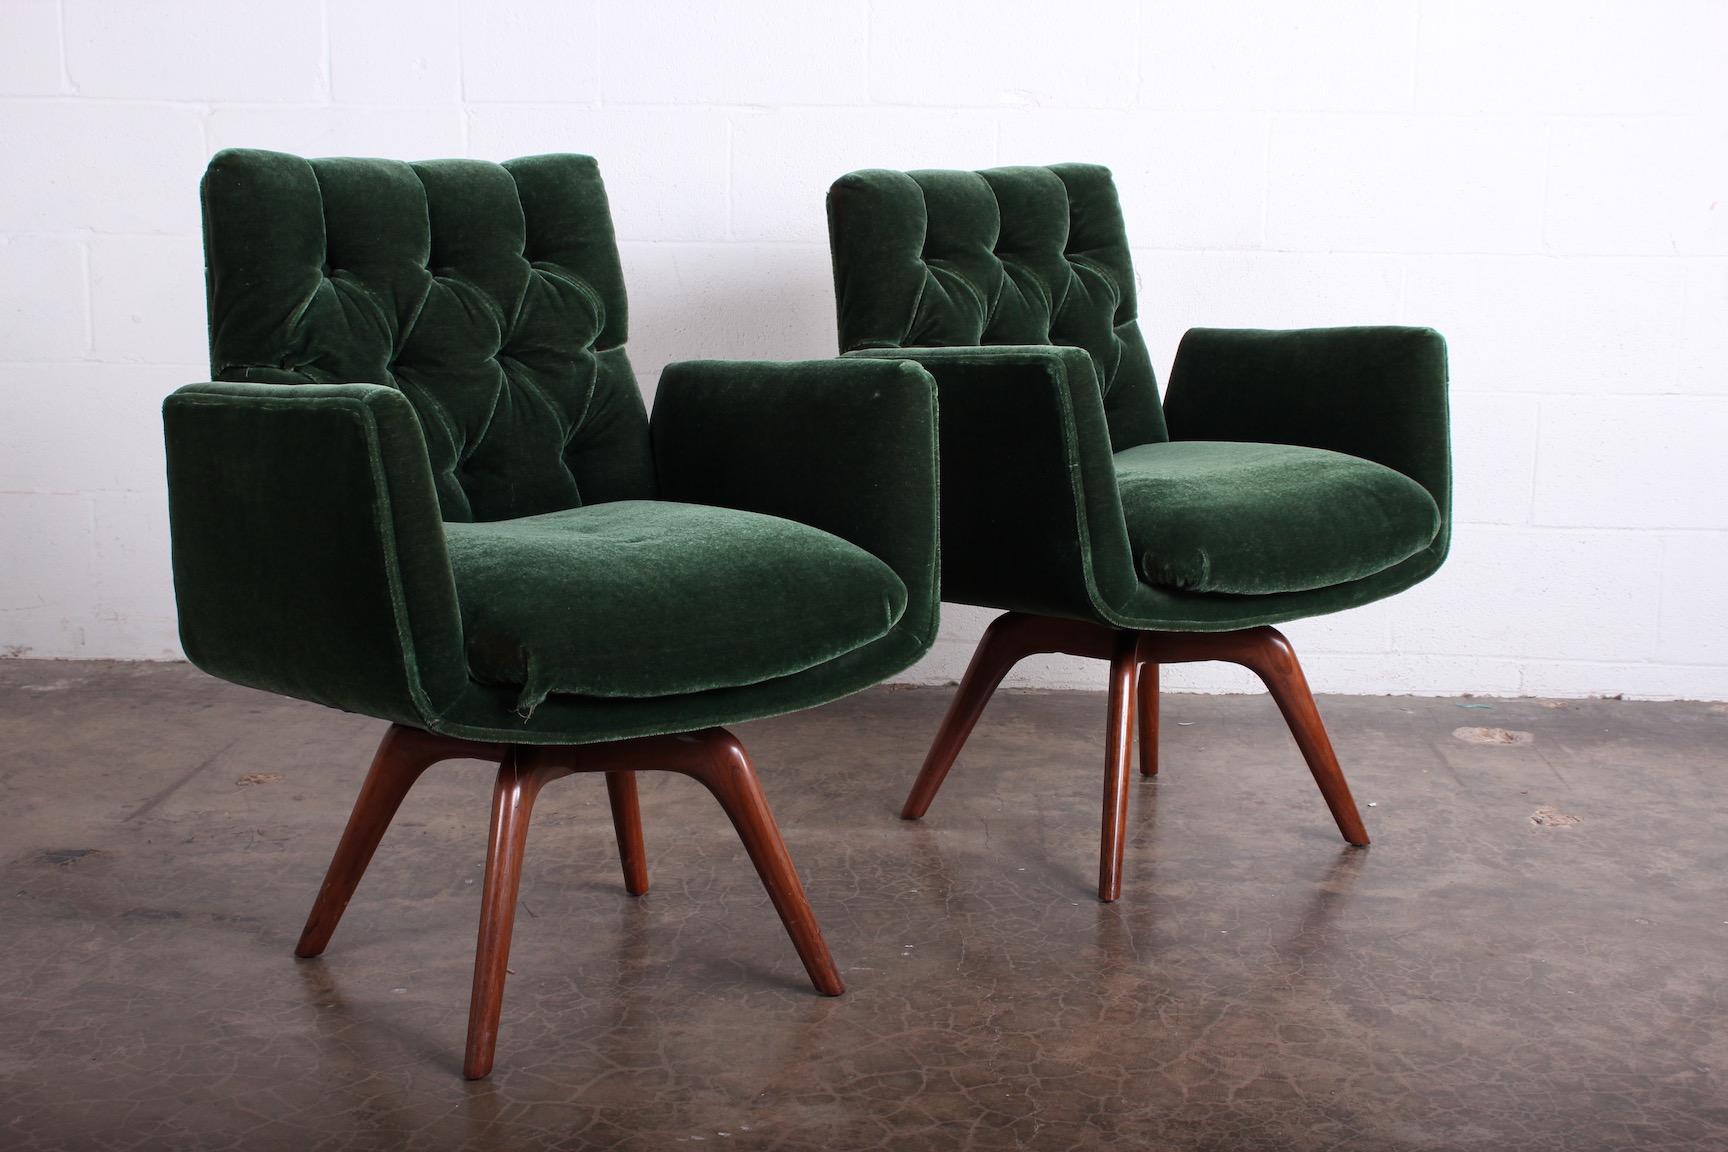 A pair of swiveling armchairs with tufted mohair on walnut bases designed for a Park Ave apartment full of furnishings by Vladimir Kagan. Two pair available.